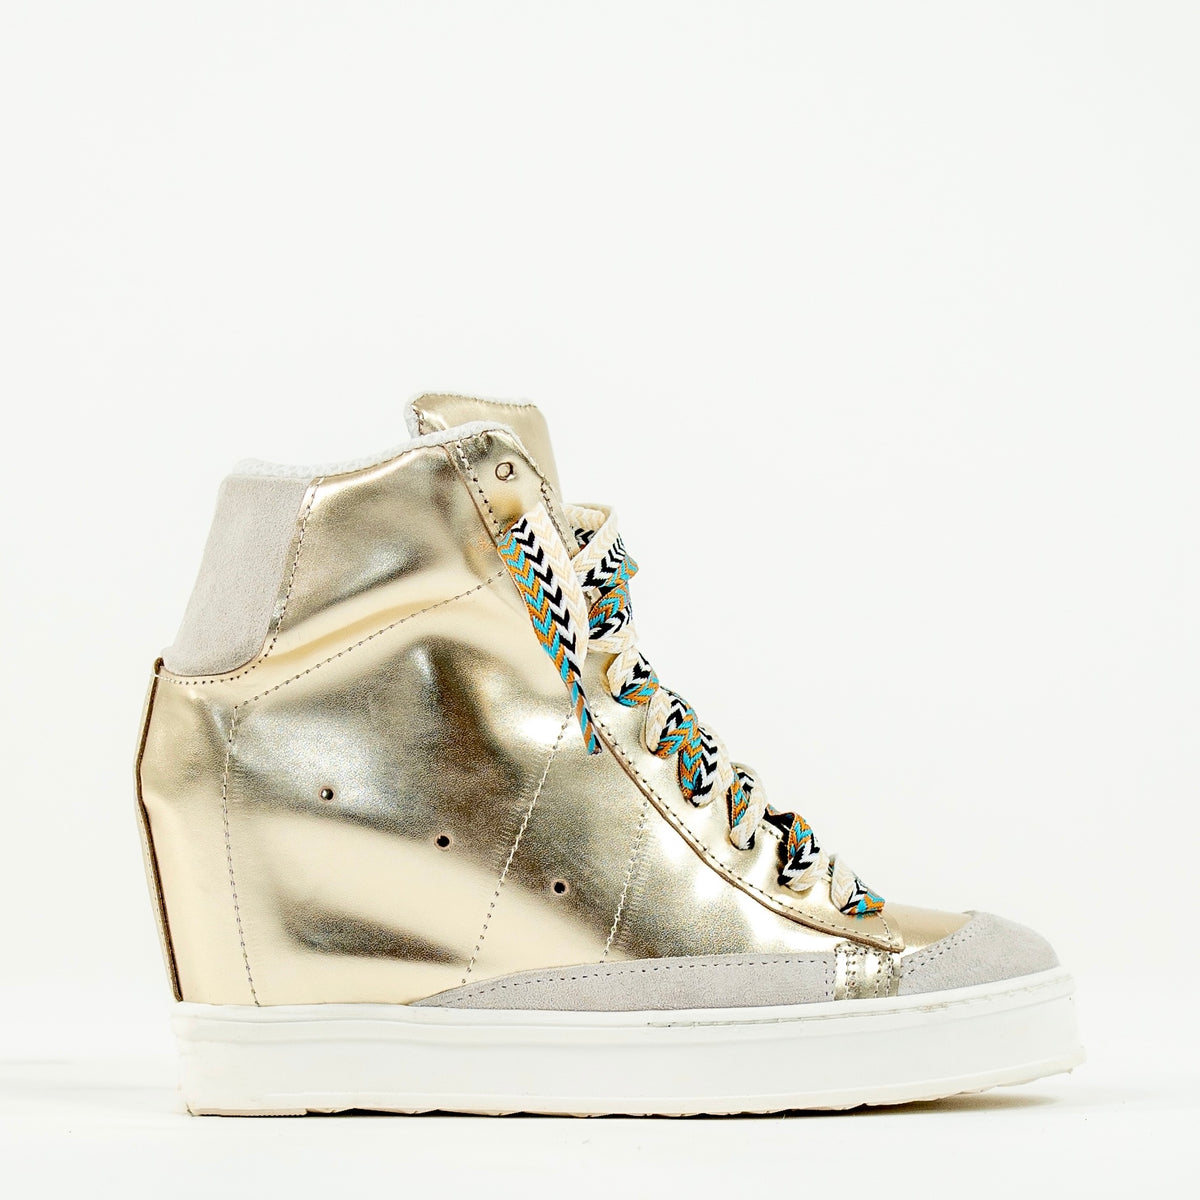 Fearless 2.0 Ouro Wedge Sneaker